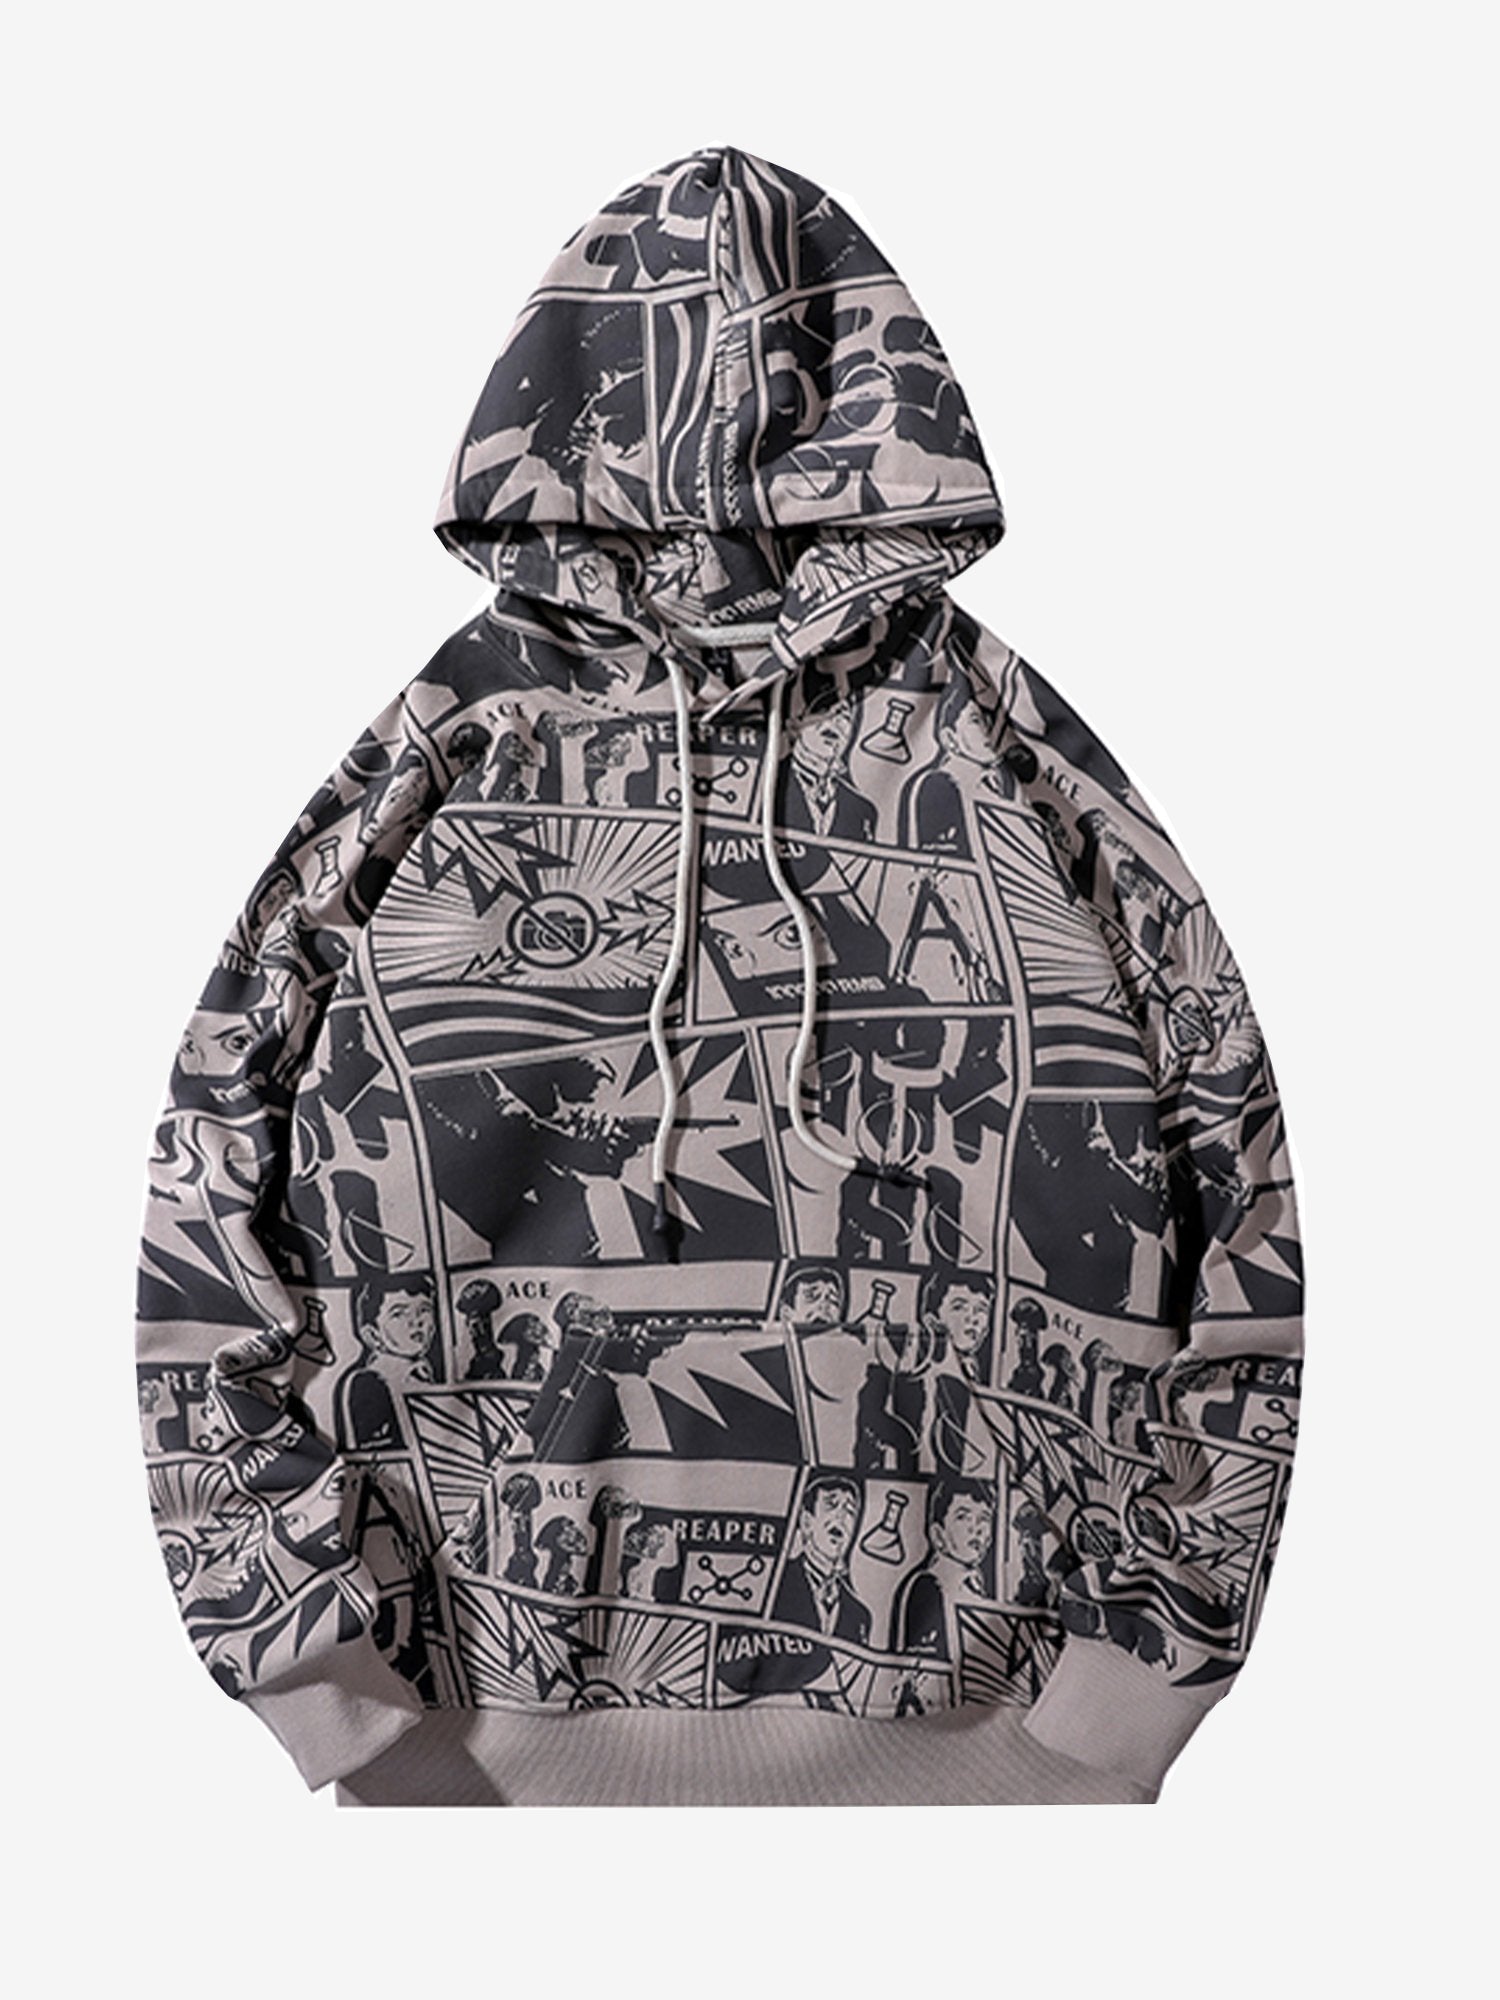 JUSTNOTAG Cartoon Polyester Cotton Hooded Hoodies